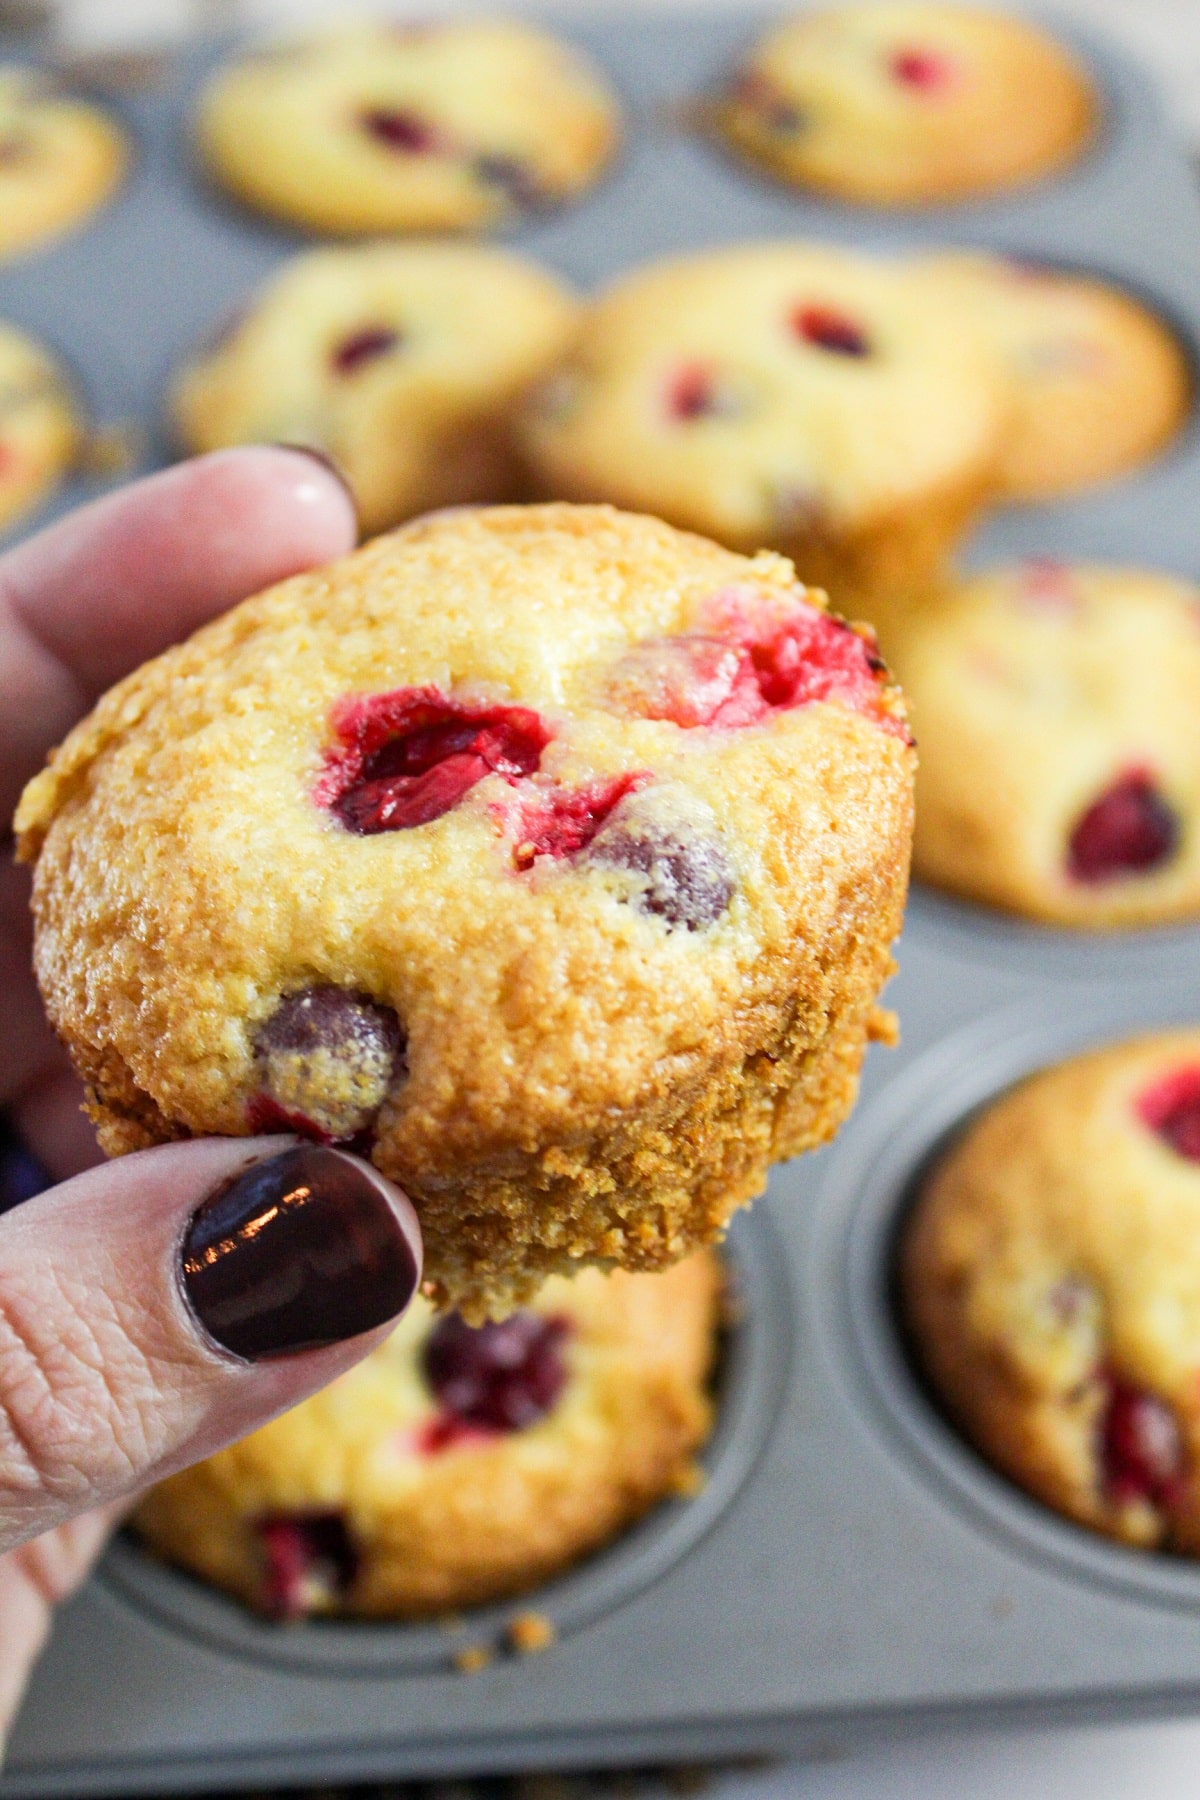 muffin held in hand. Golden brown and topped with fresh cranberries.